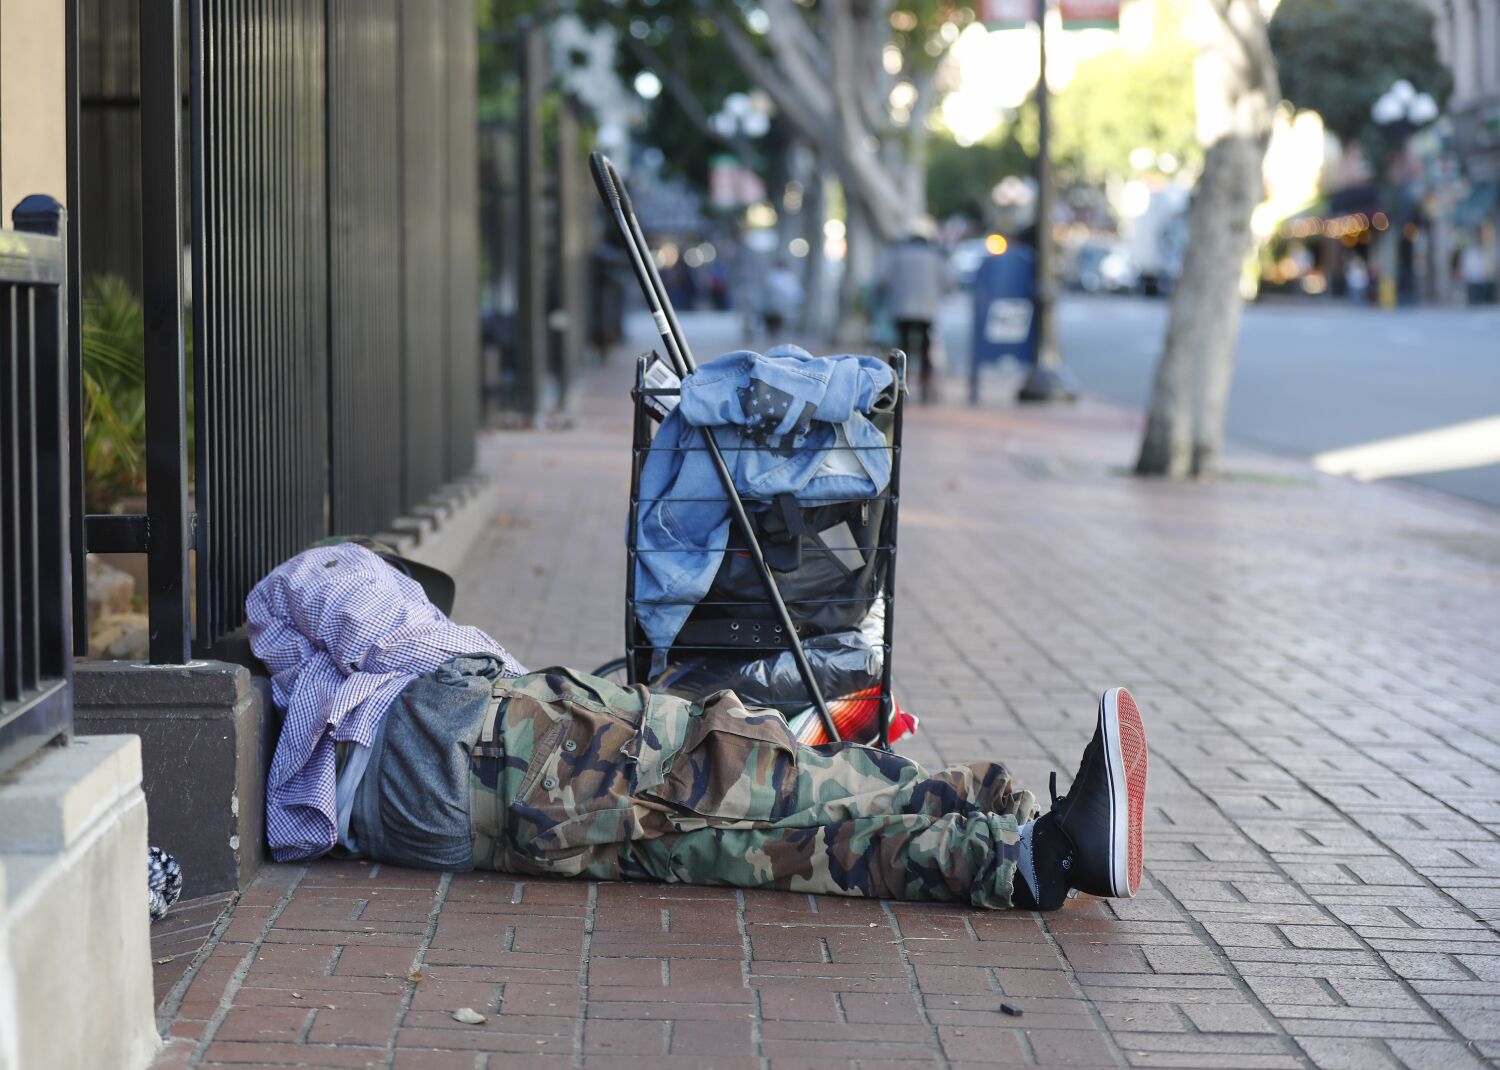 Report: twice as many people became homeless than housed in October